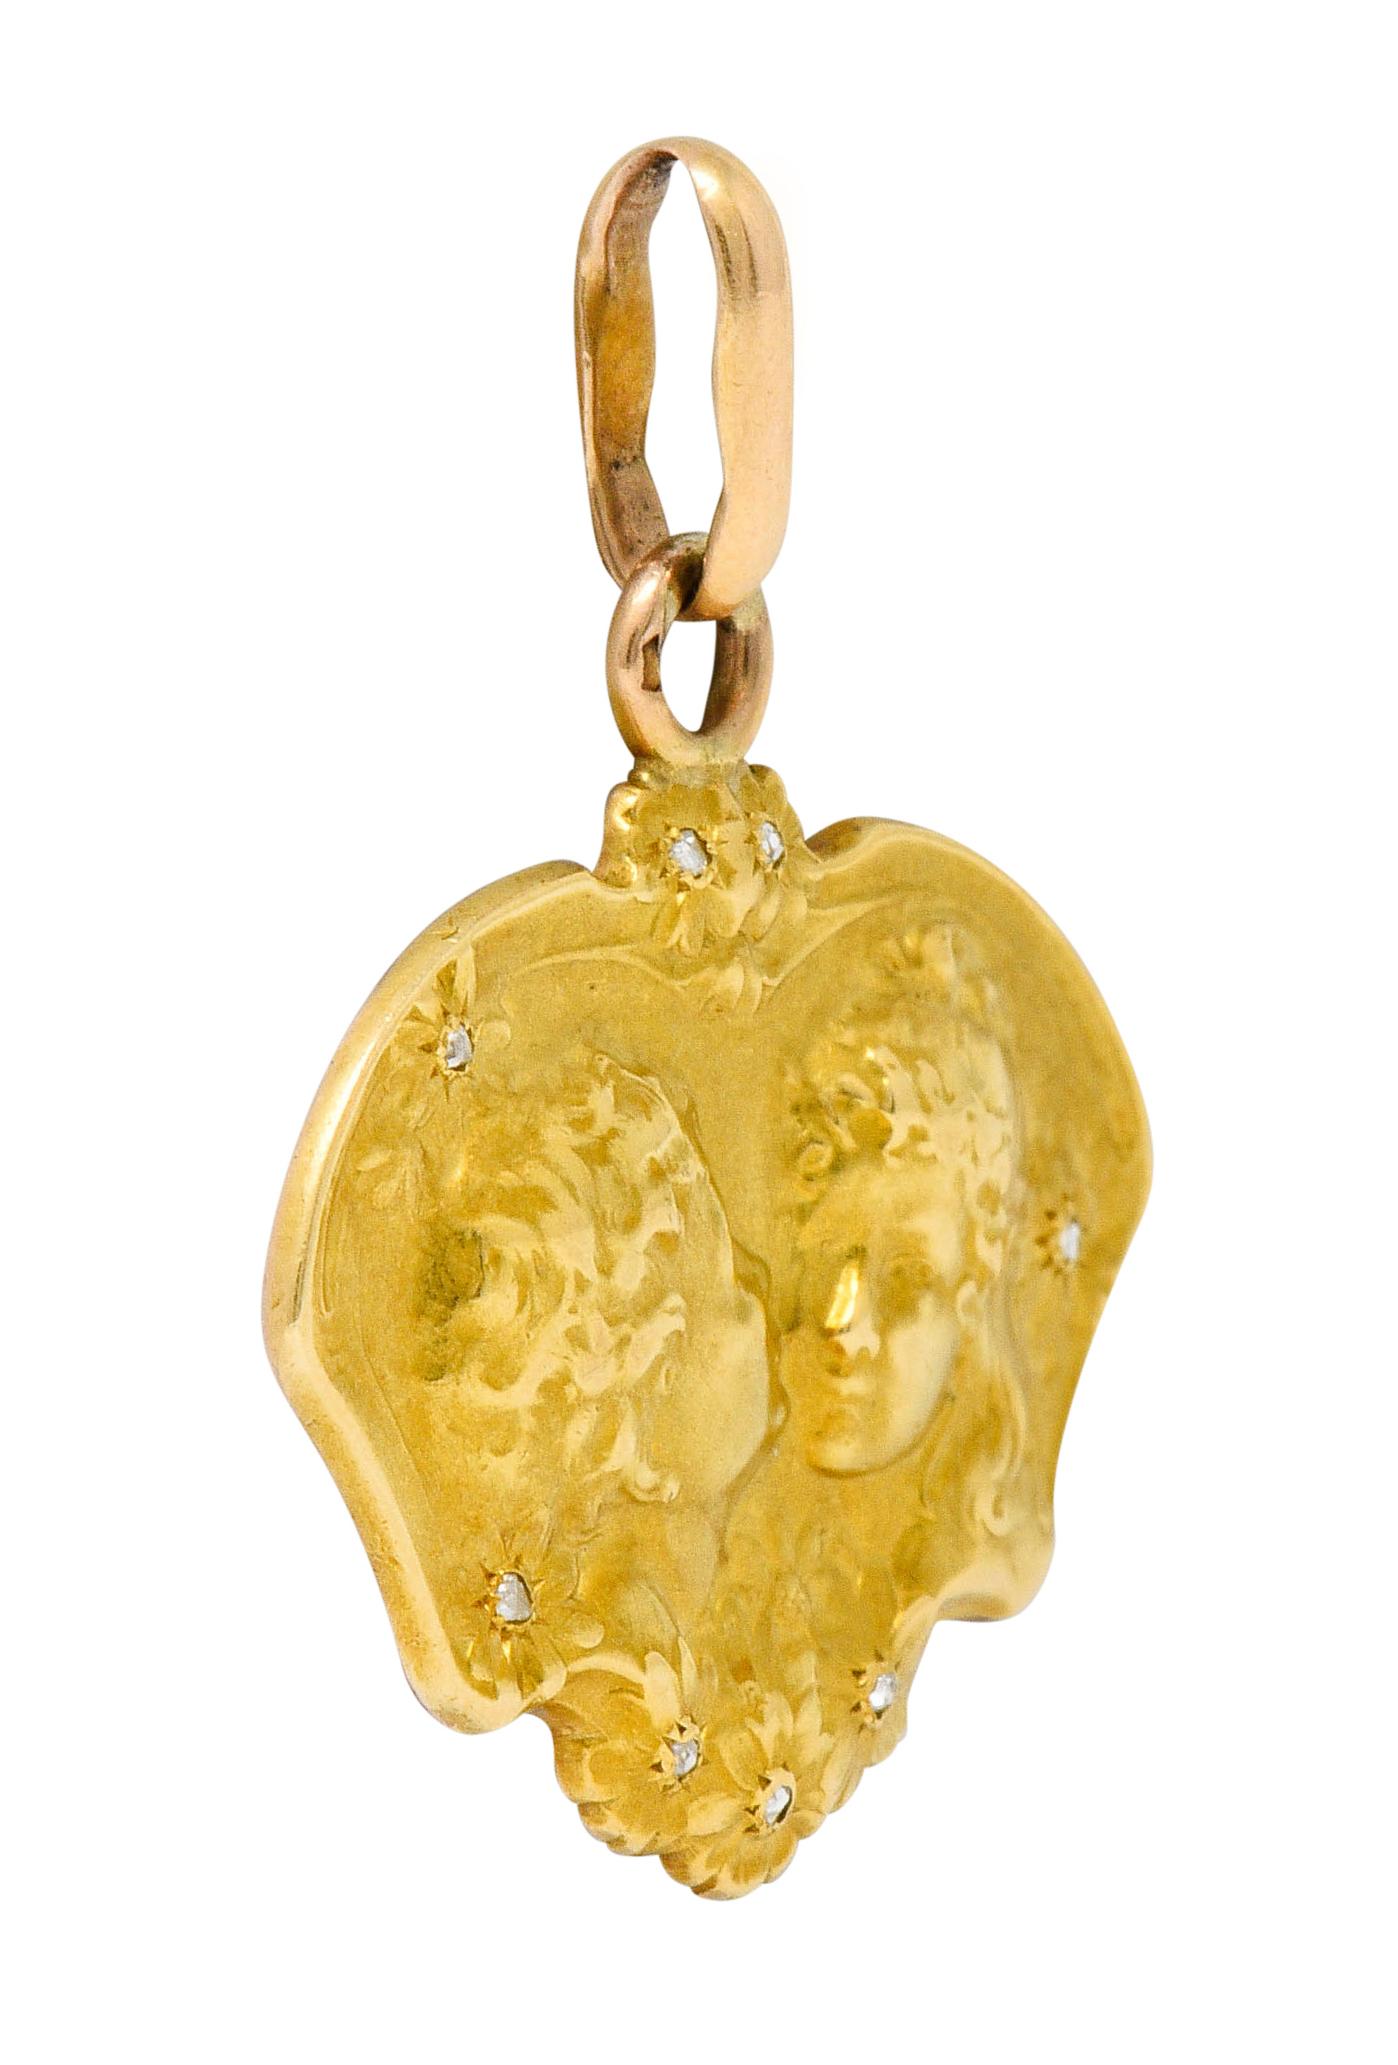 Pendant features highly rendered yellow gold repousse at front

Depicting florals and a little boy kissing a little girl innocently on the cheek

Florals are accented by rose cut diamonds

Back of pendant is rose gold and deeply engraved with a